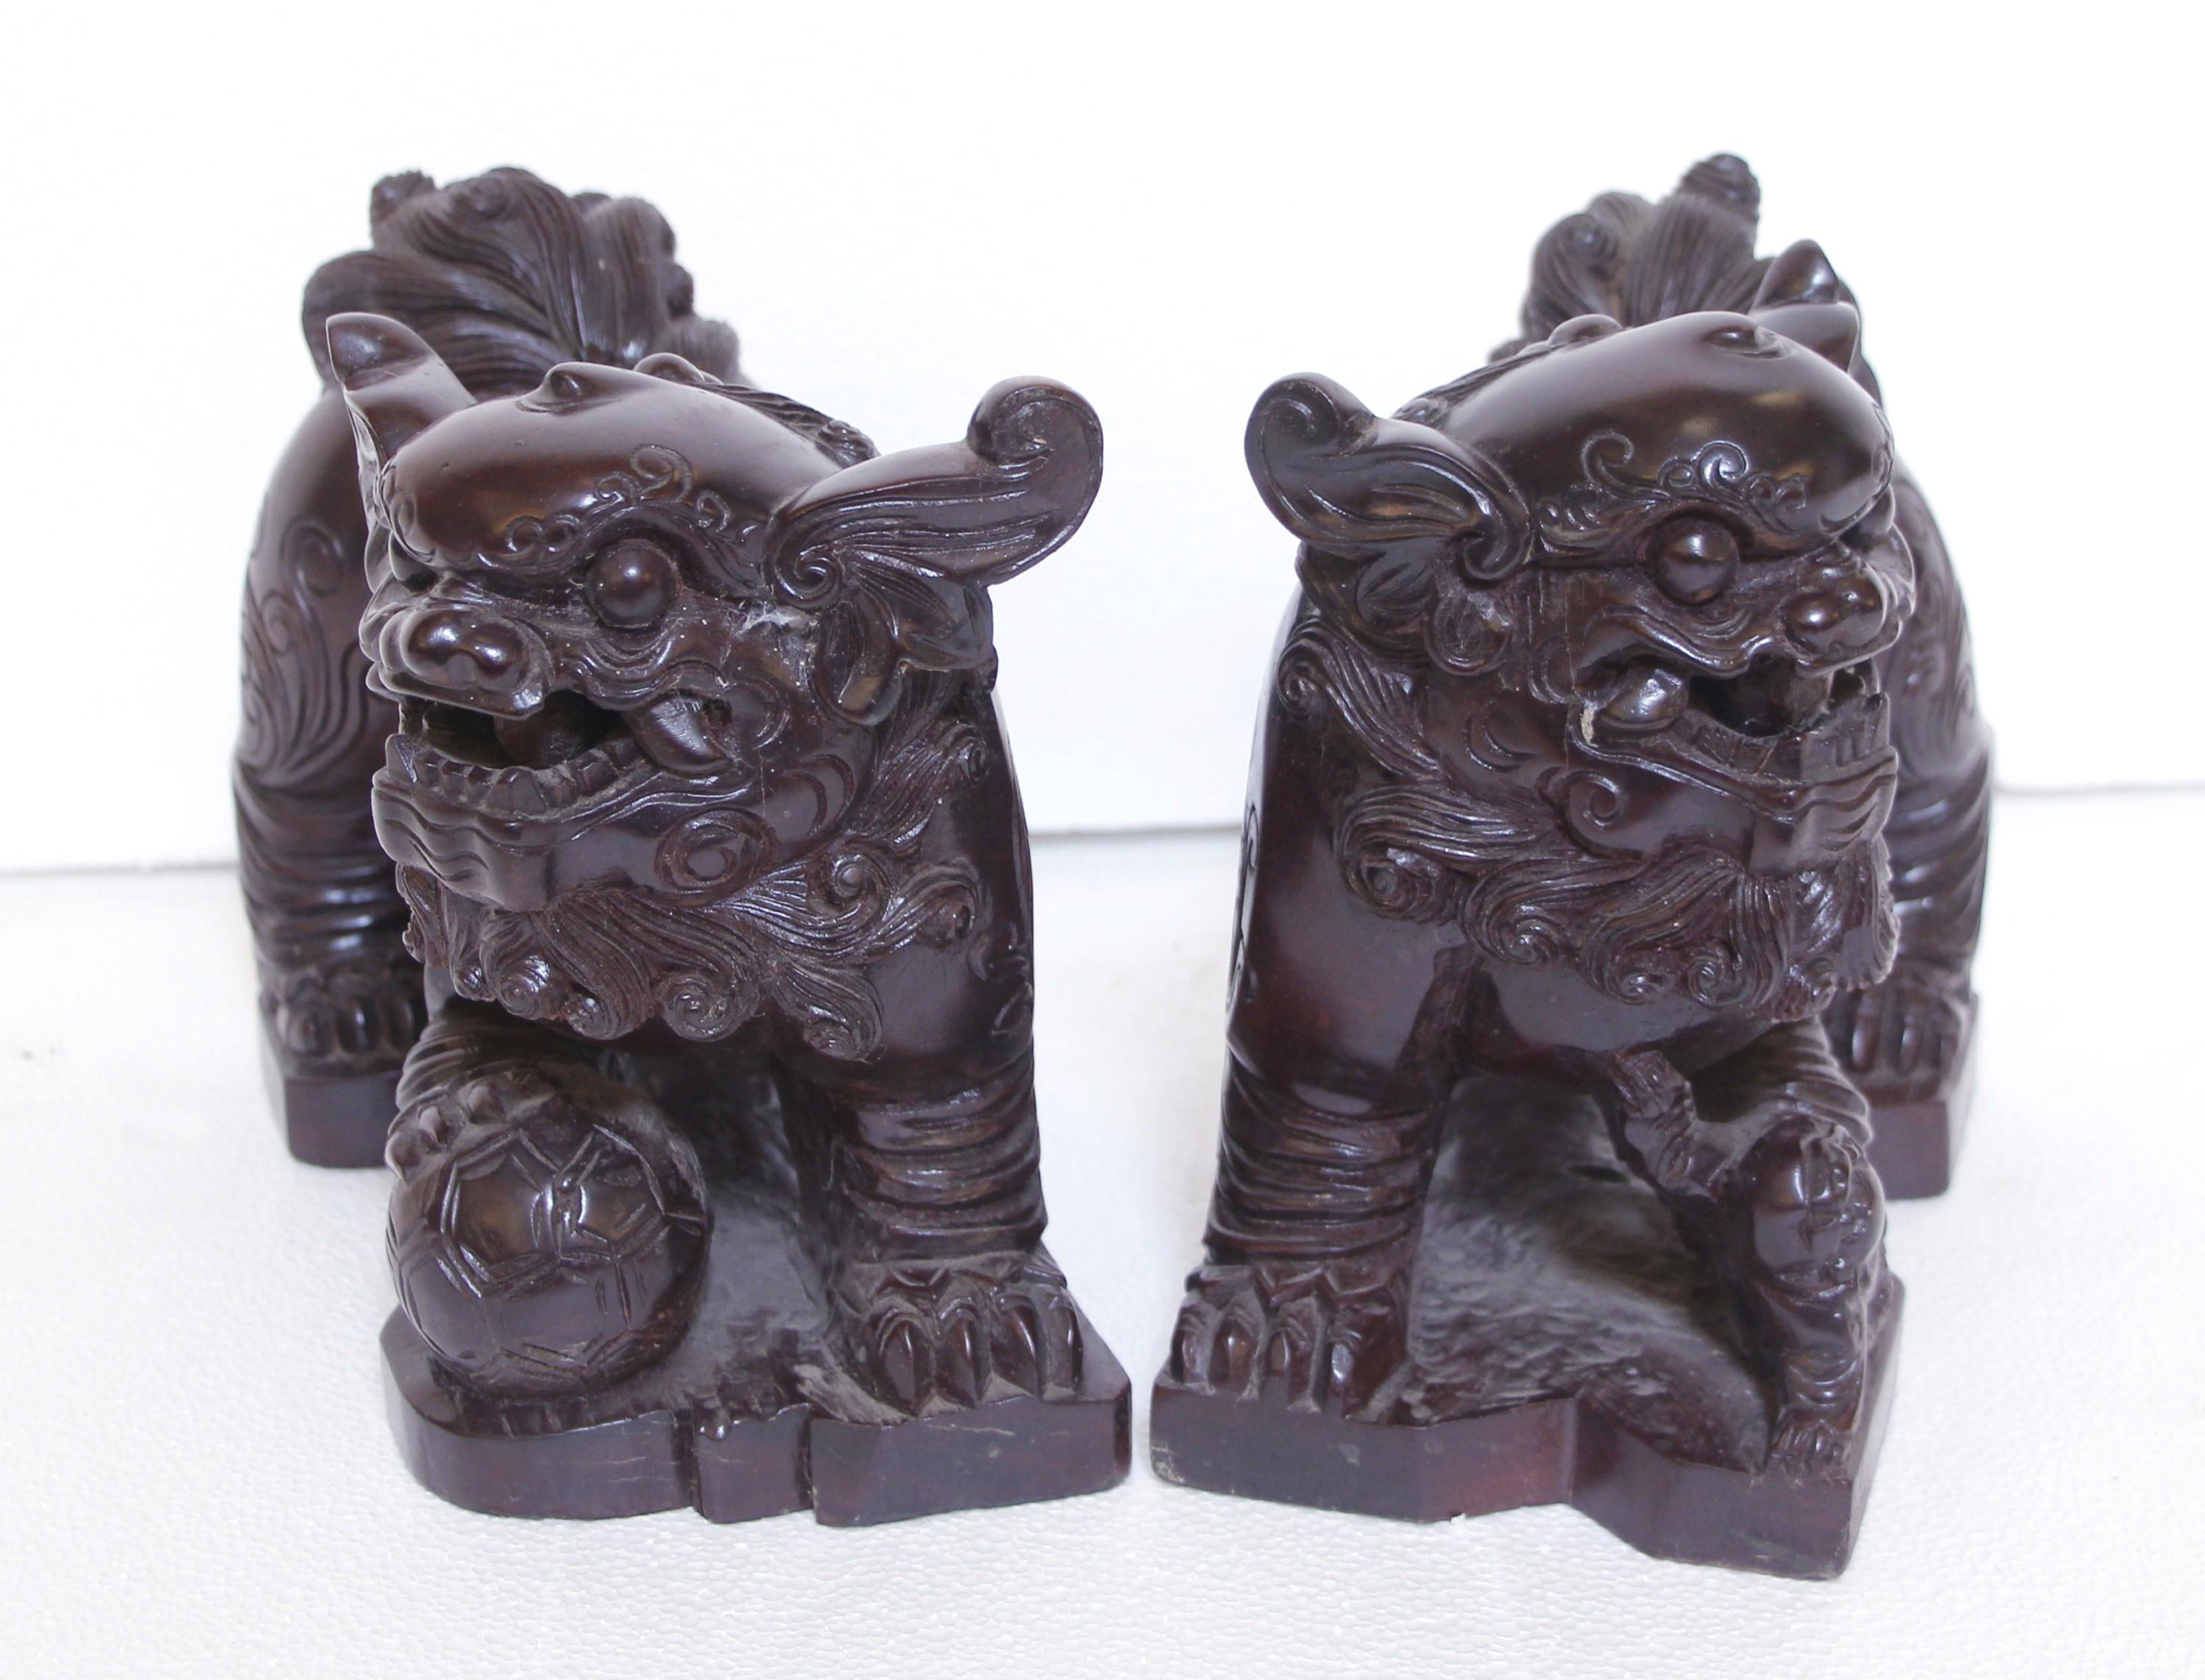 20th Century pair of hand carved Cambodian foo dogs made of a very dark stained wood. Good condition with appropriate wear from age. Priced as a pair. Please note, this item is located in one of our NYC locations.